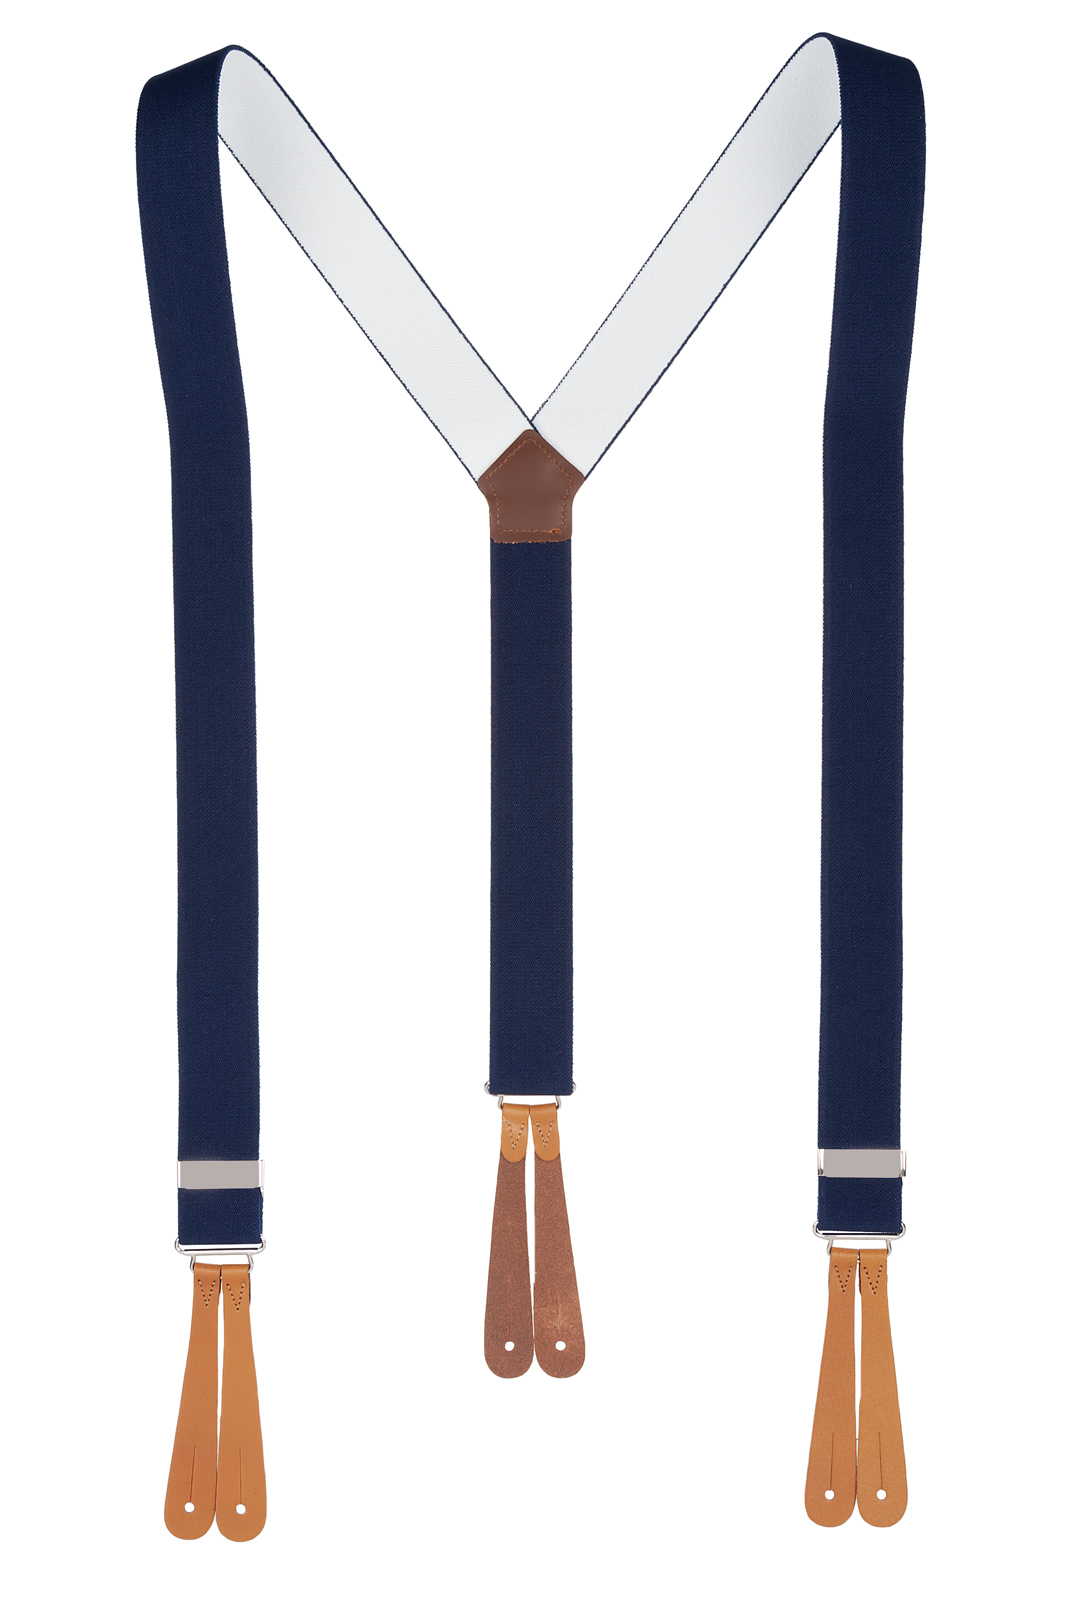 Navy Blue Button Braces with Tan leather Ends